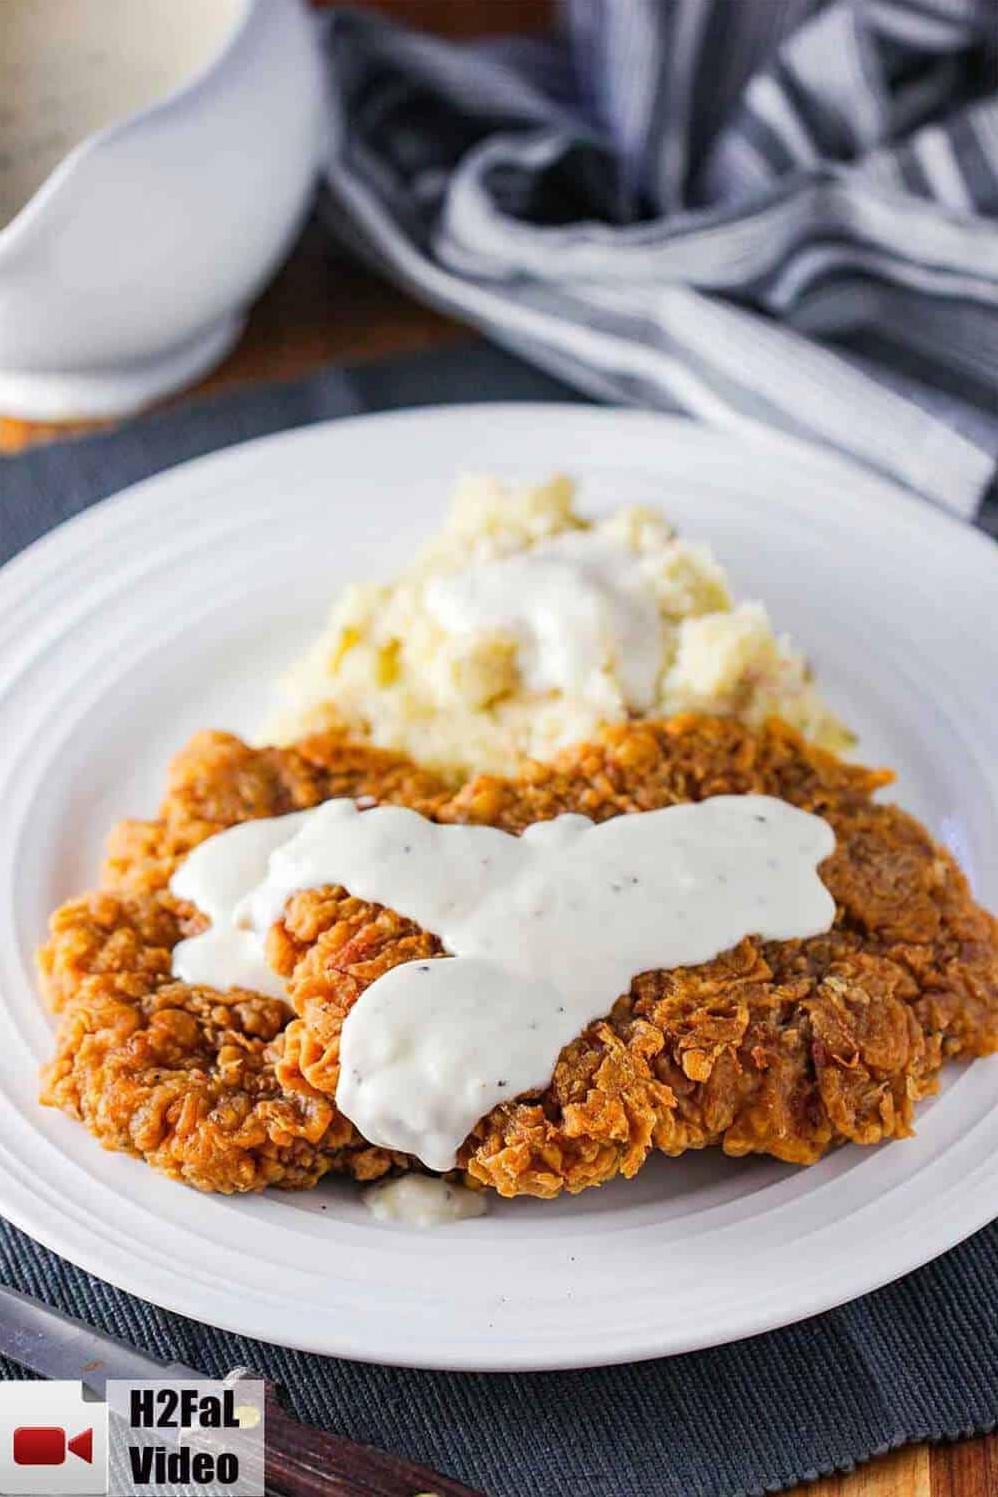  What's better than comfort food? Comfort food with a crispy coating!